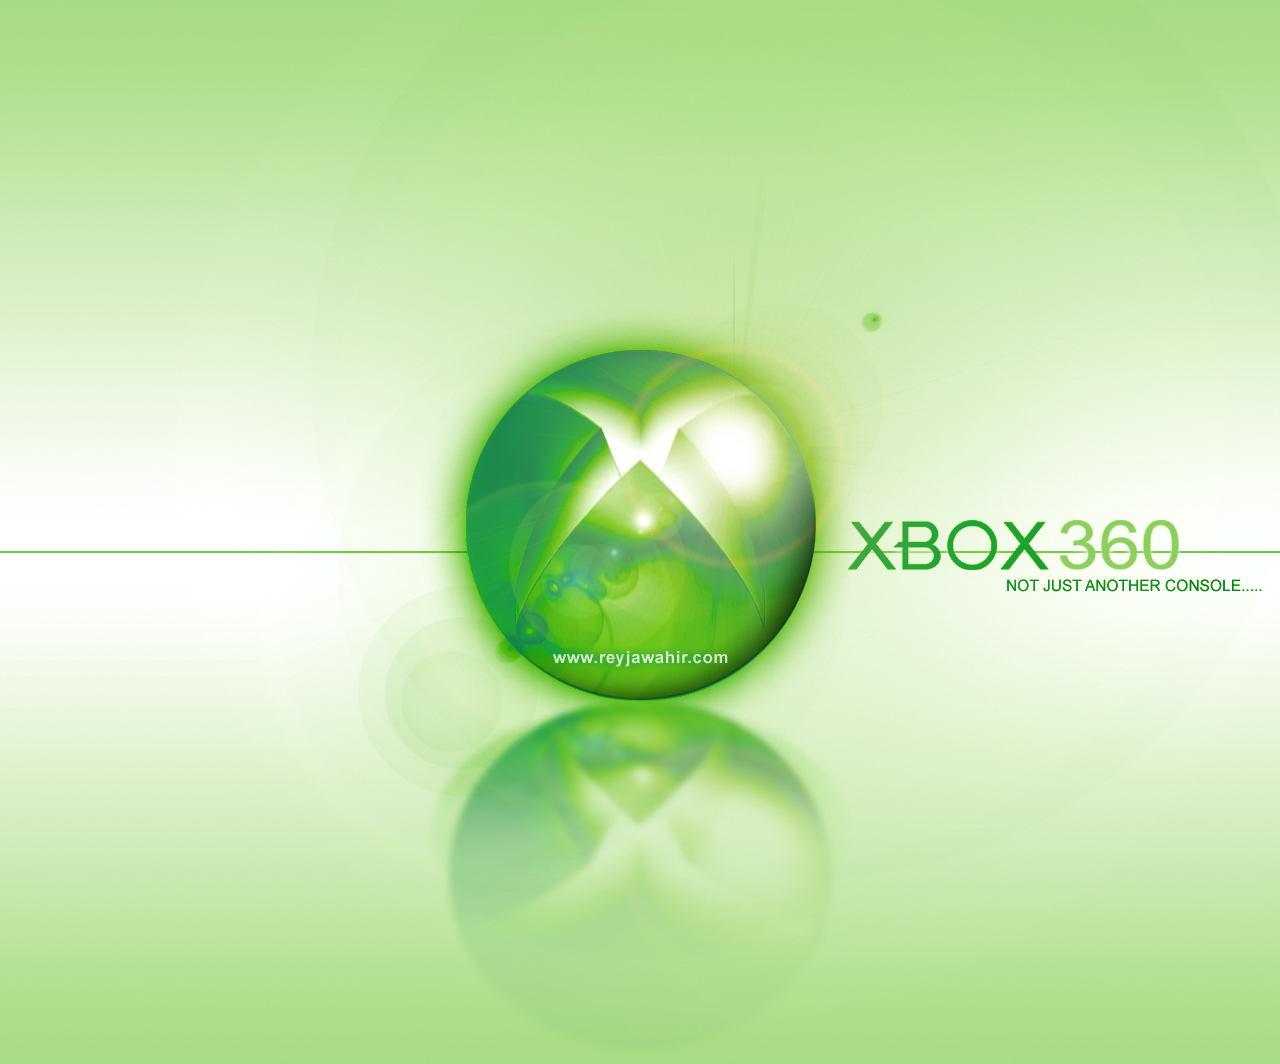 Another Xbox Wallpaper By Reyjdesigns Fan Art Games